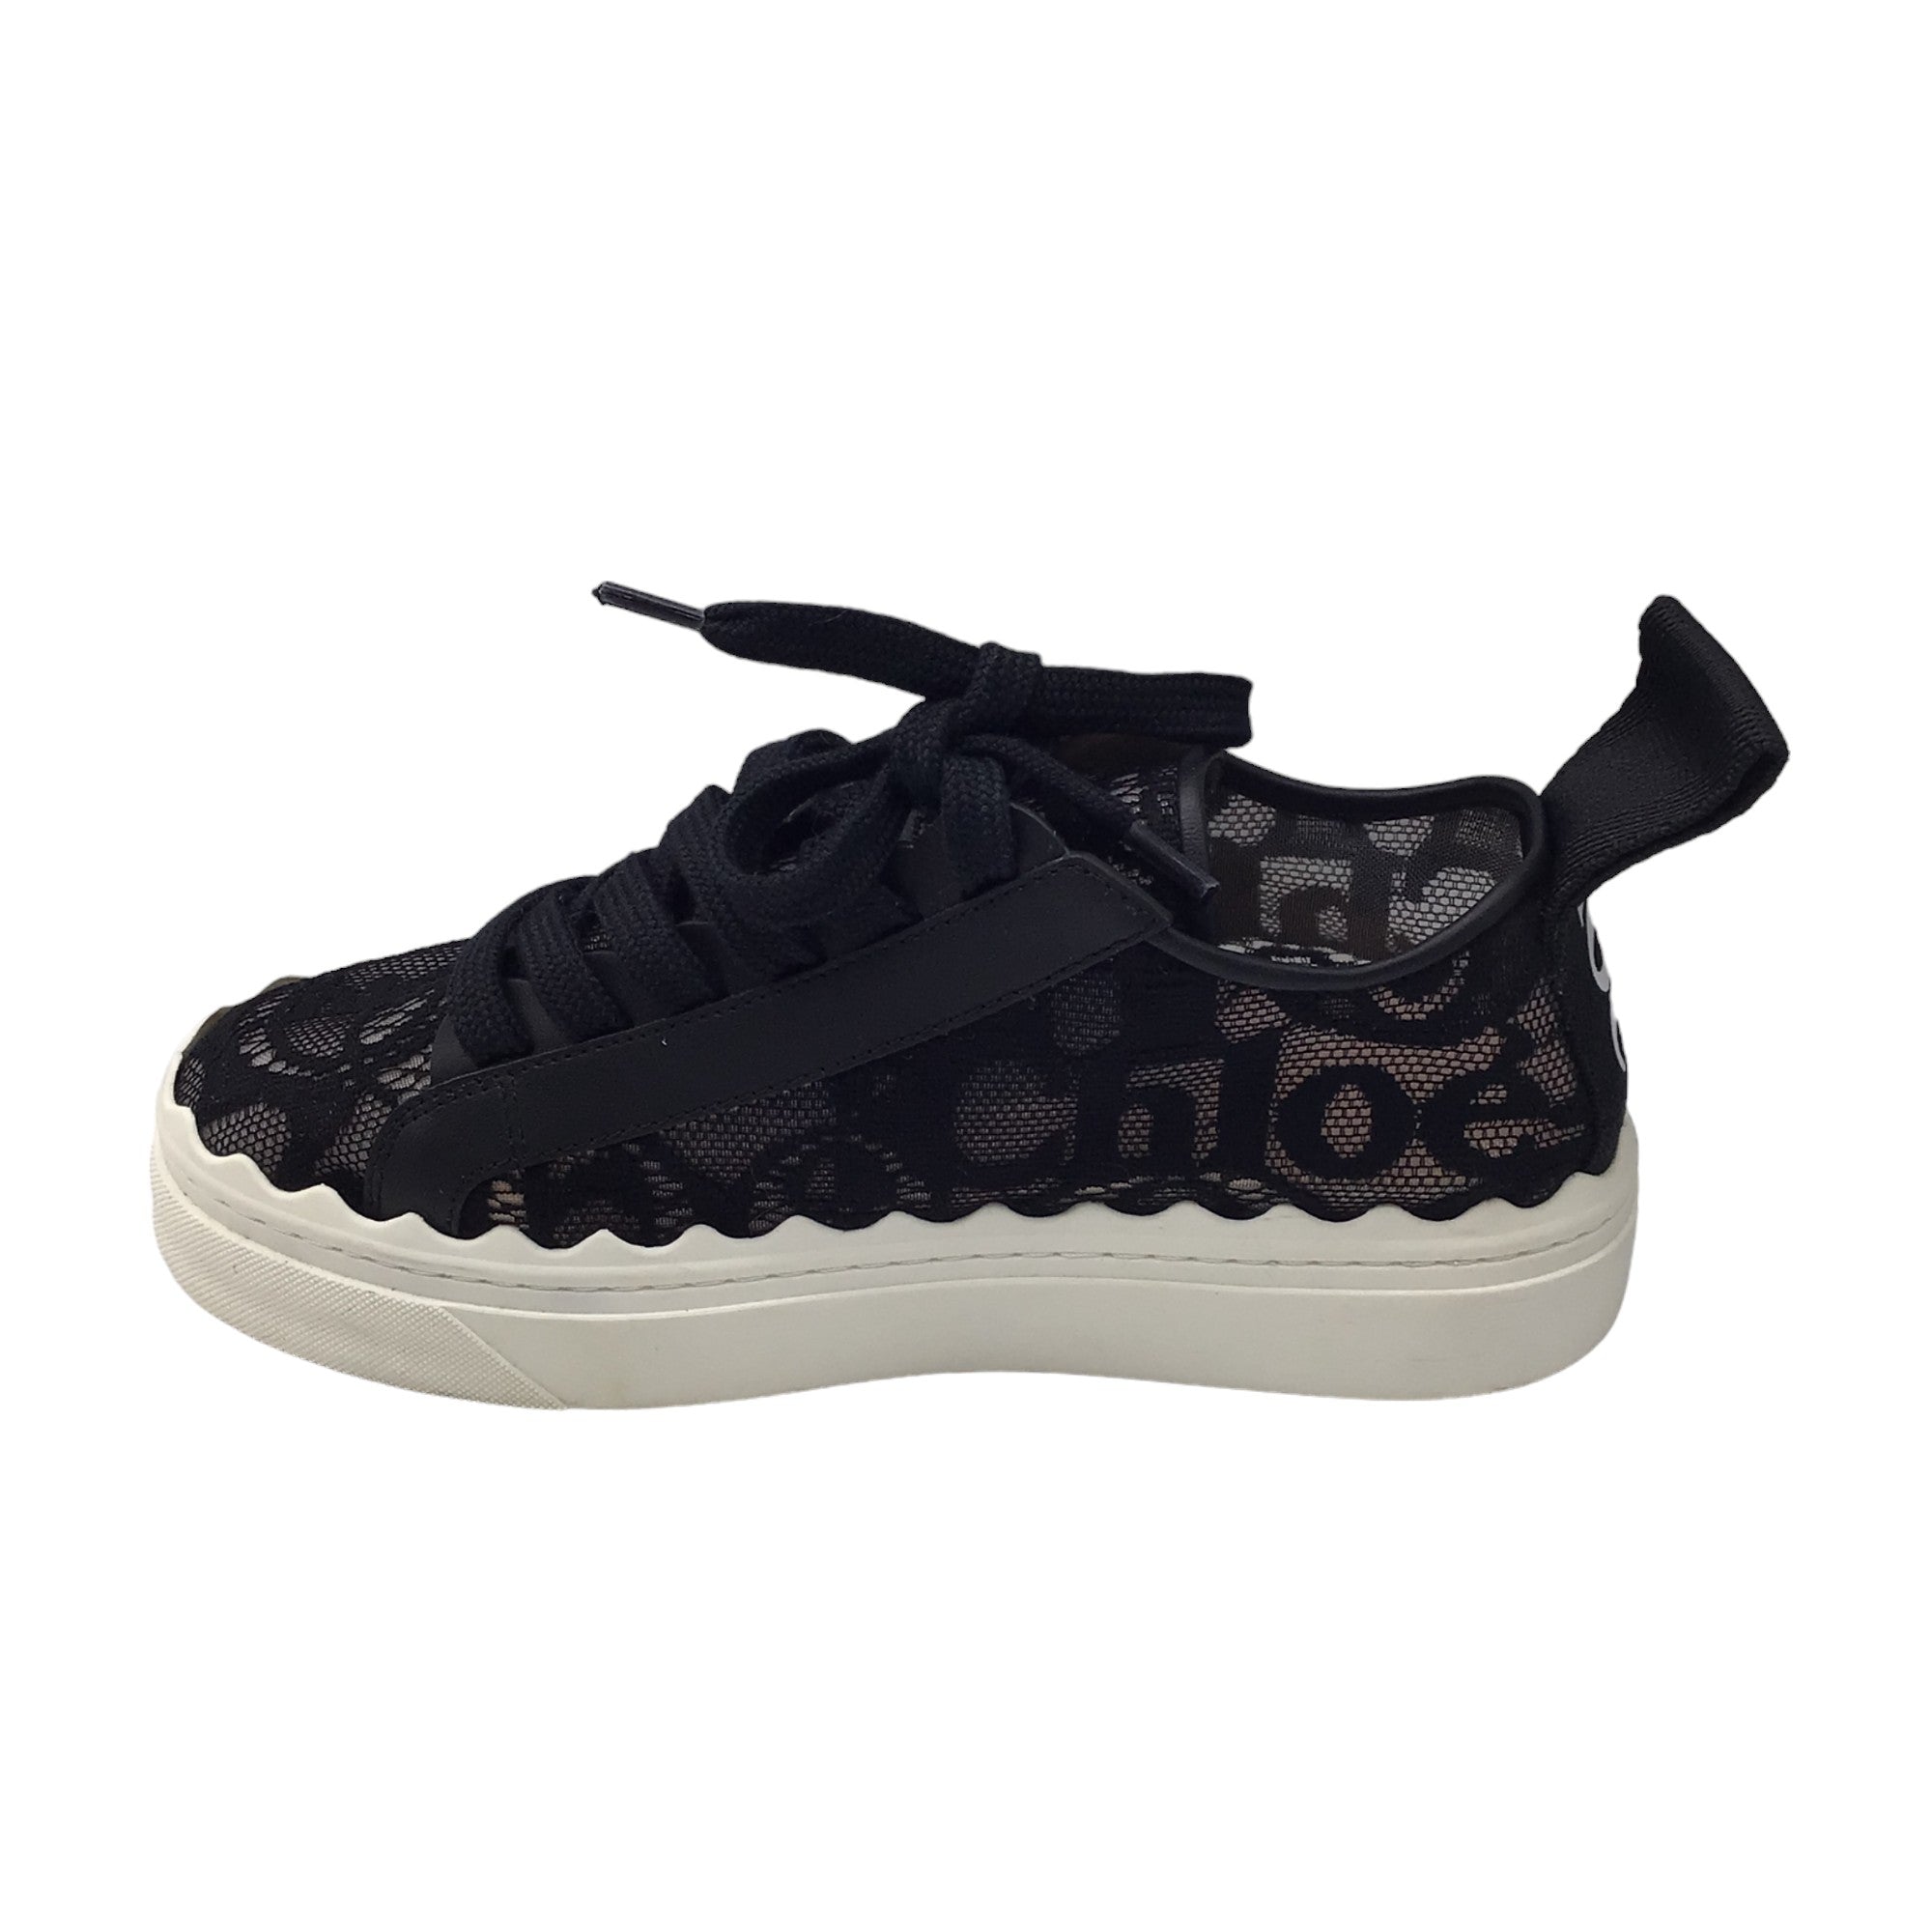 Chloe Black / White Leather Trimmed Lace Sneakers